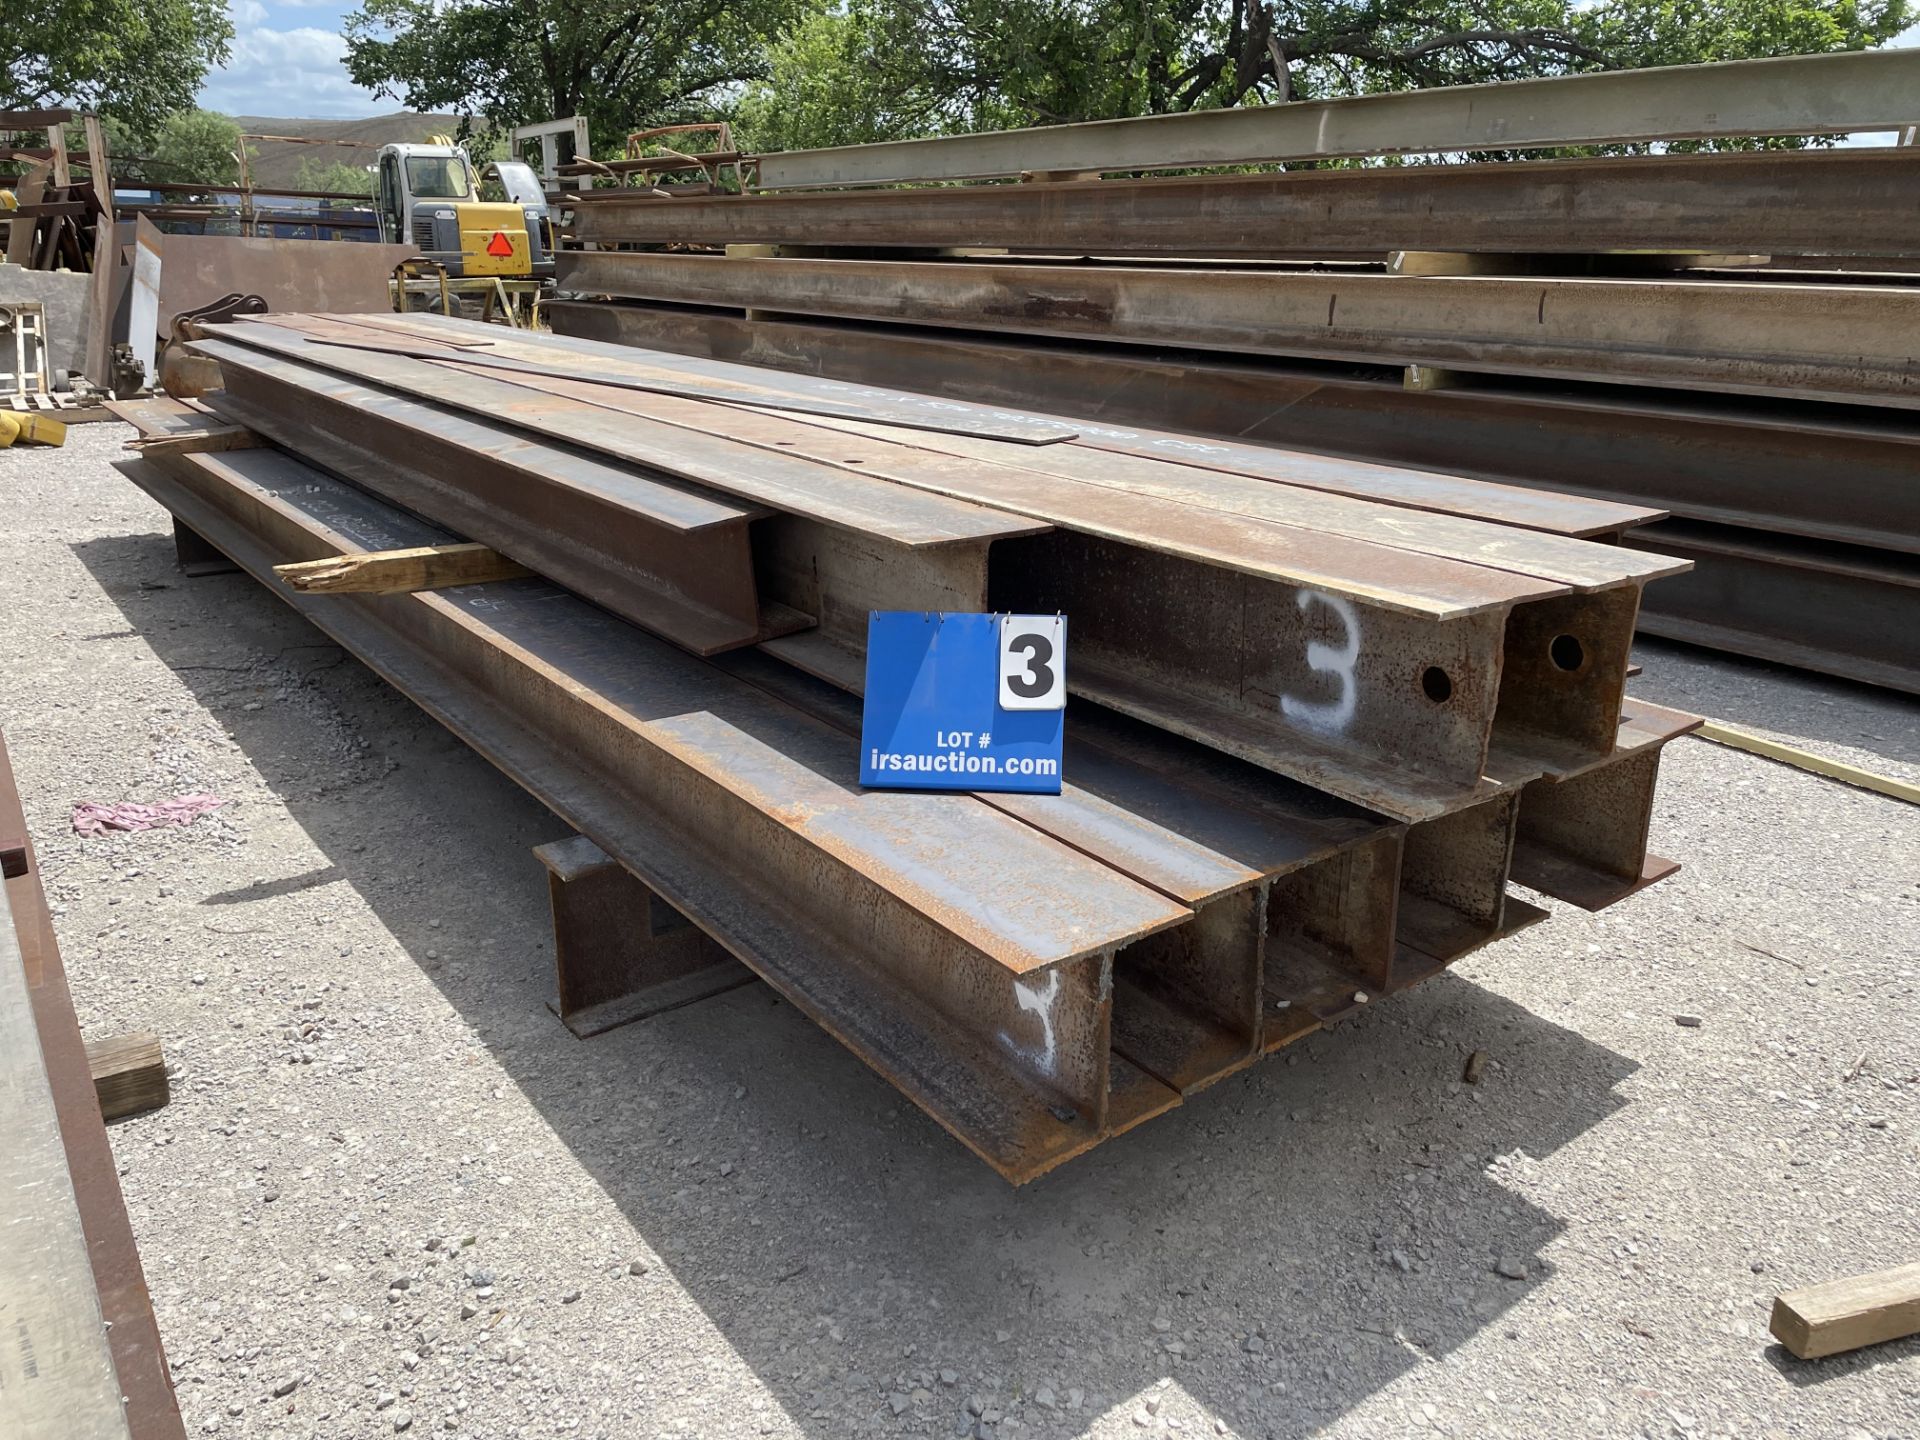 (10) I BEAMS, APPROX: (8) 12" WIDE FLANGE X 23' LONG, (1) 12" WIDE FLANGE X 19' LONG, (1) 10" WIDE